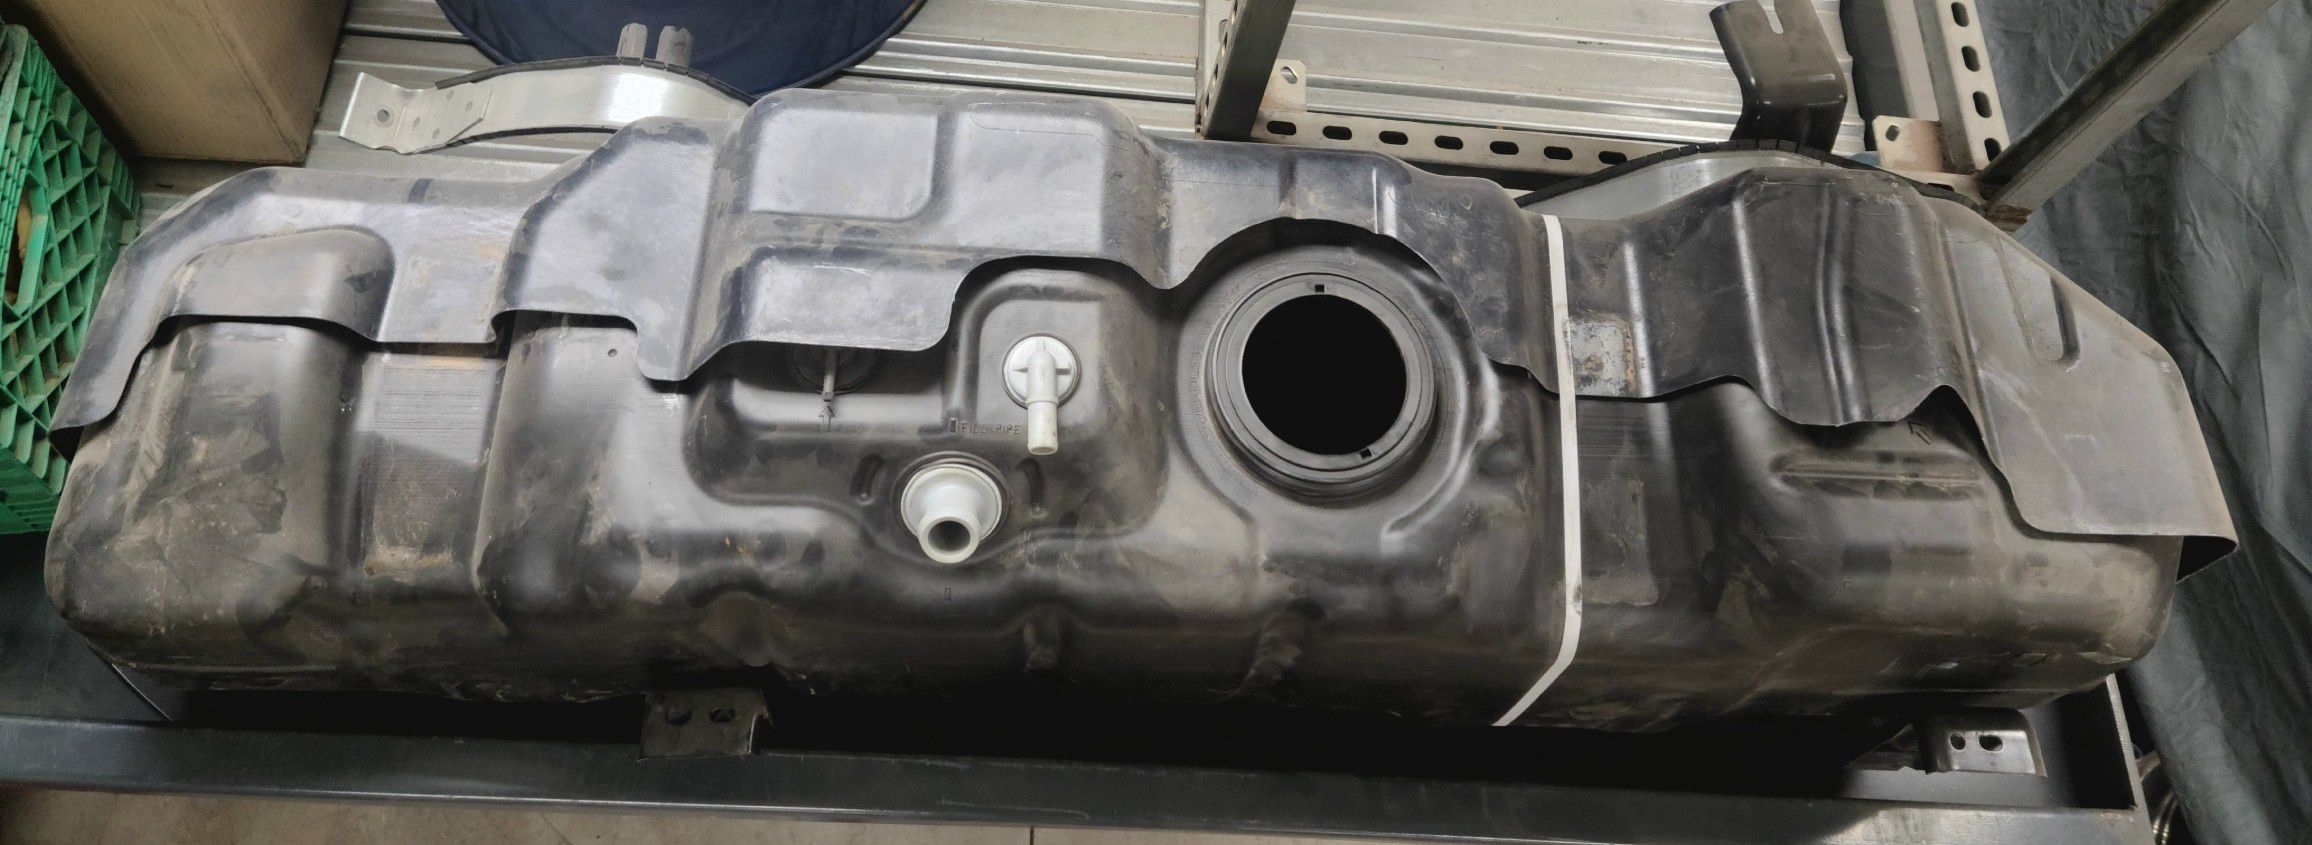 Fuel / Gas Tank removed from 2015 F450 Superduty